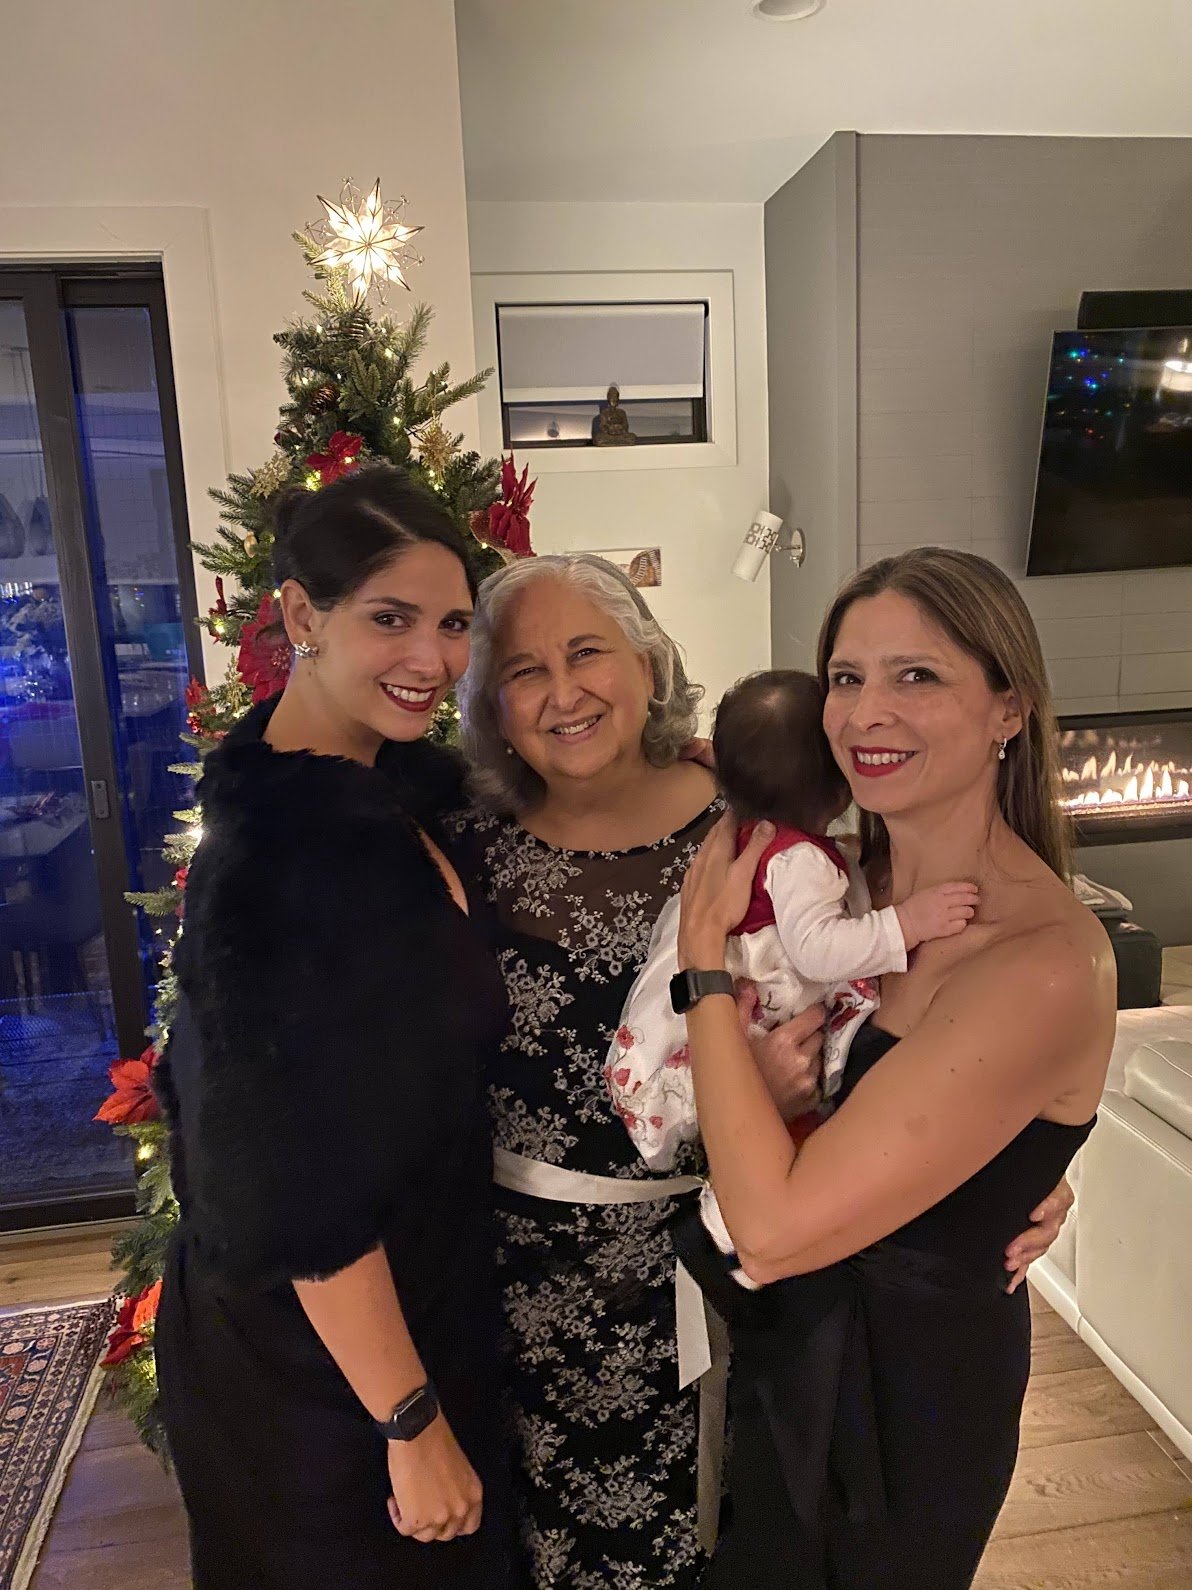 The author poses with her mother and her sister, who is holding her baby daughter